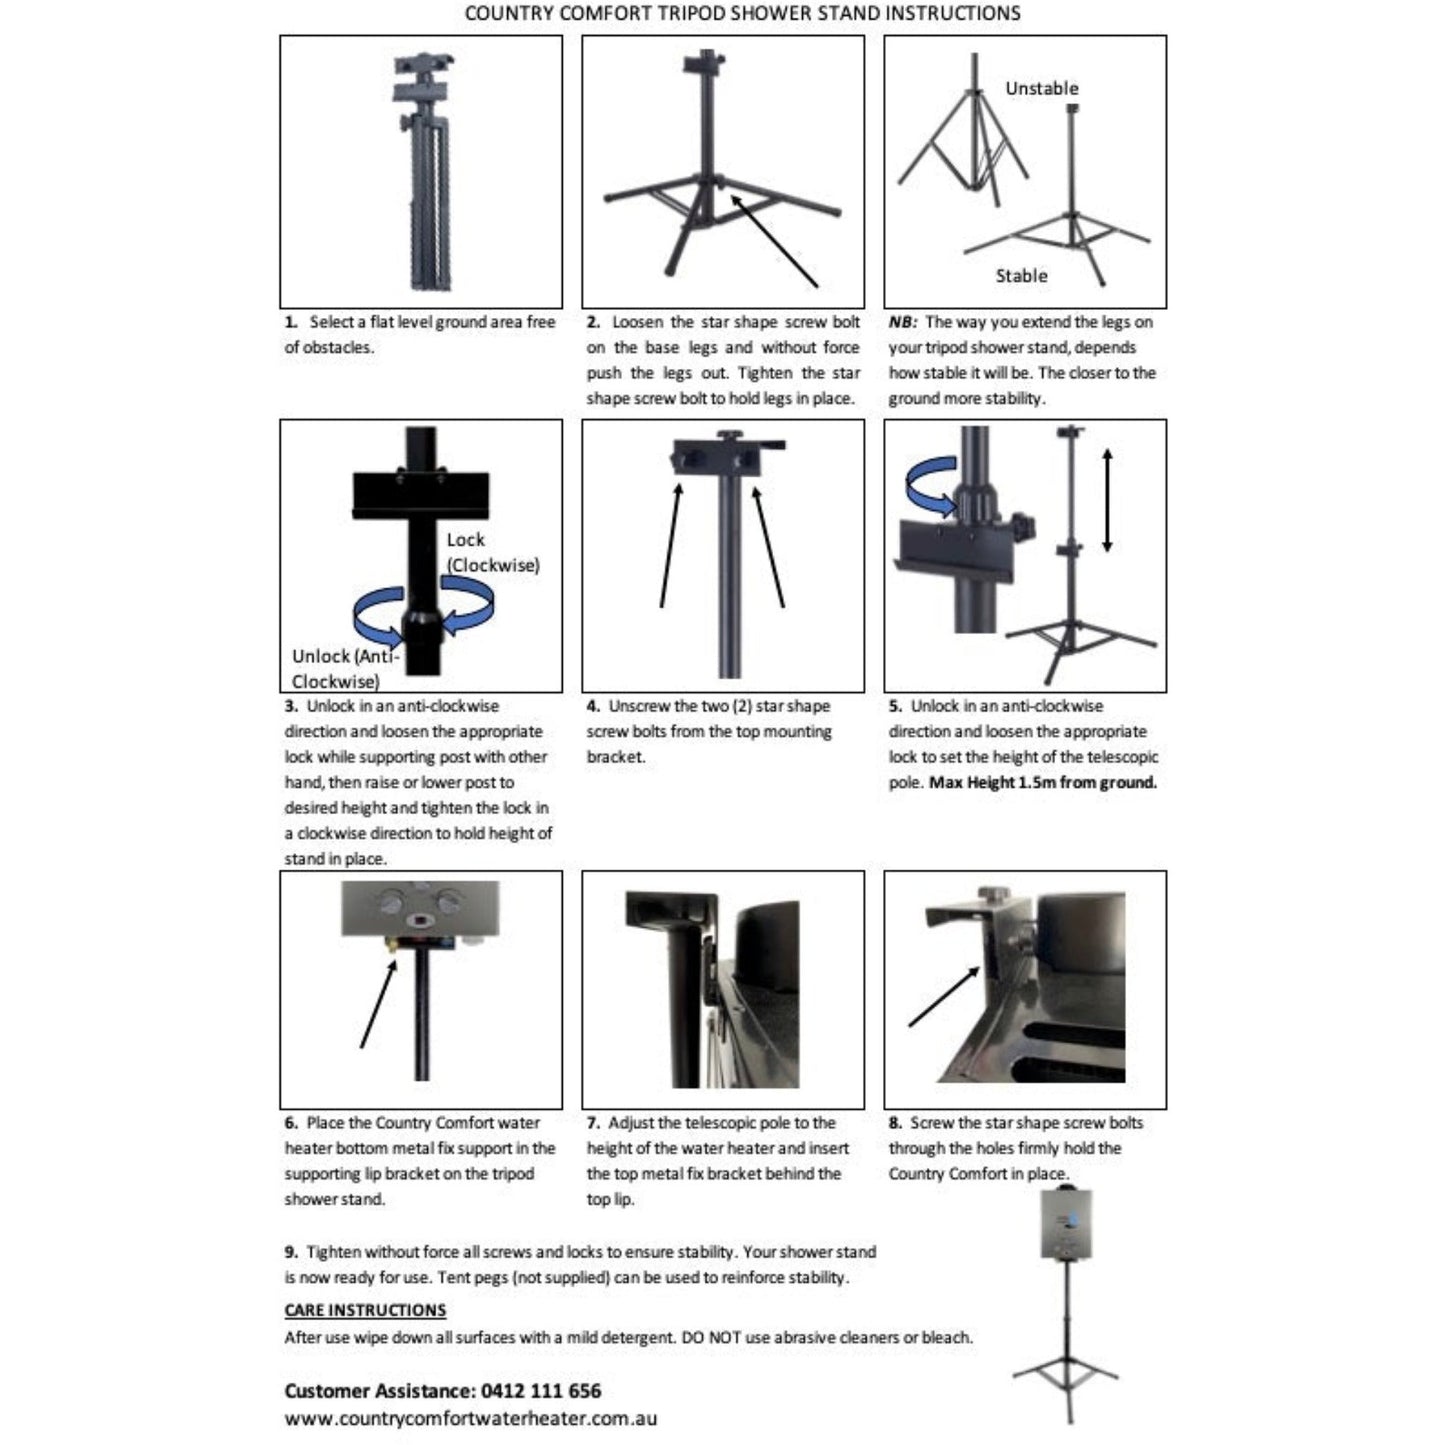 Country-Comfort-Tripod-Shower-Stand-Instructions